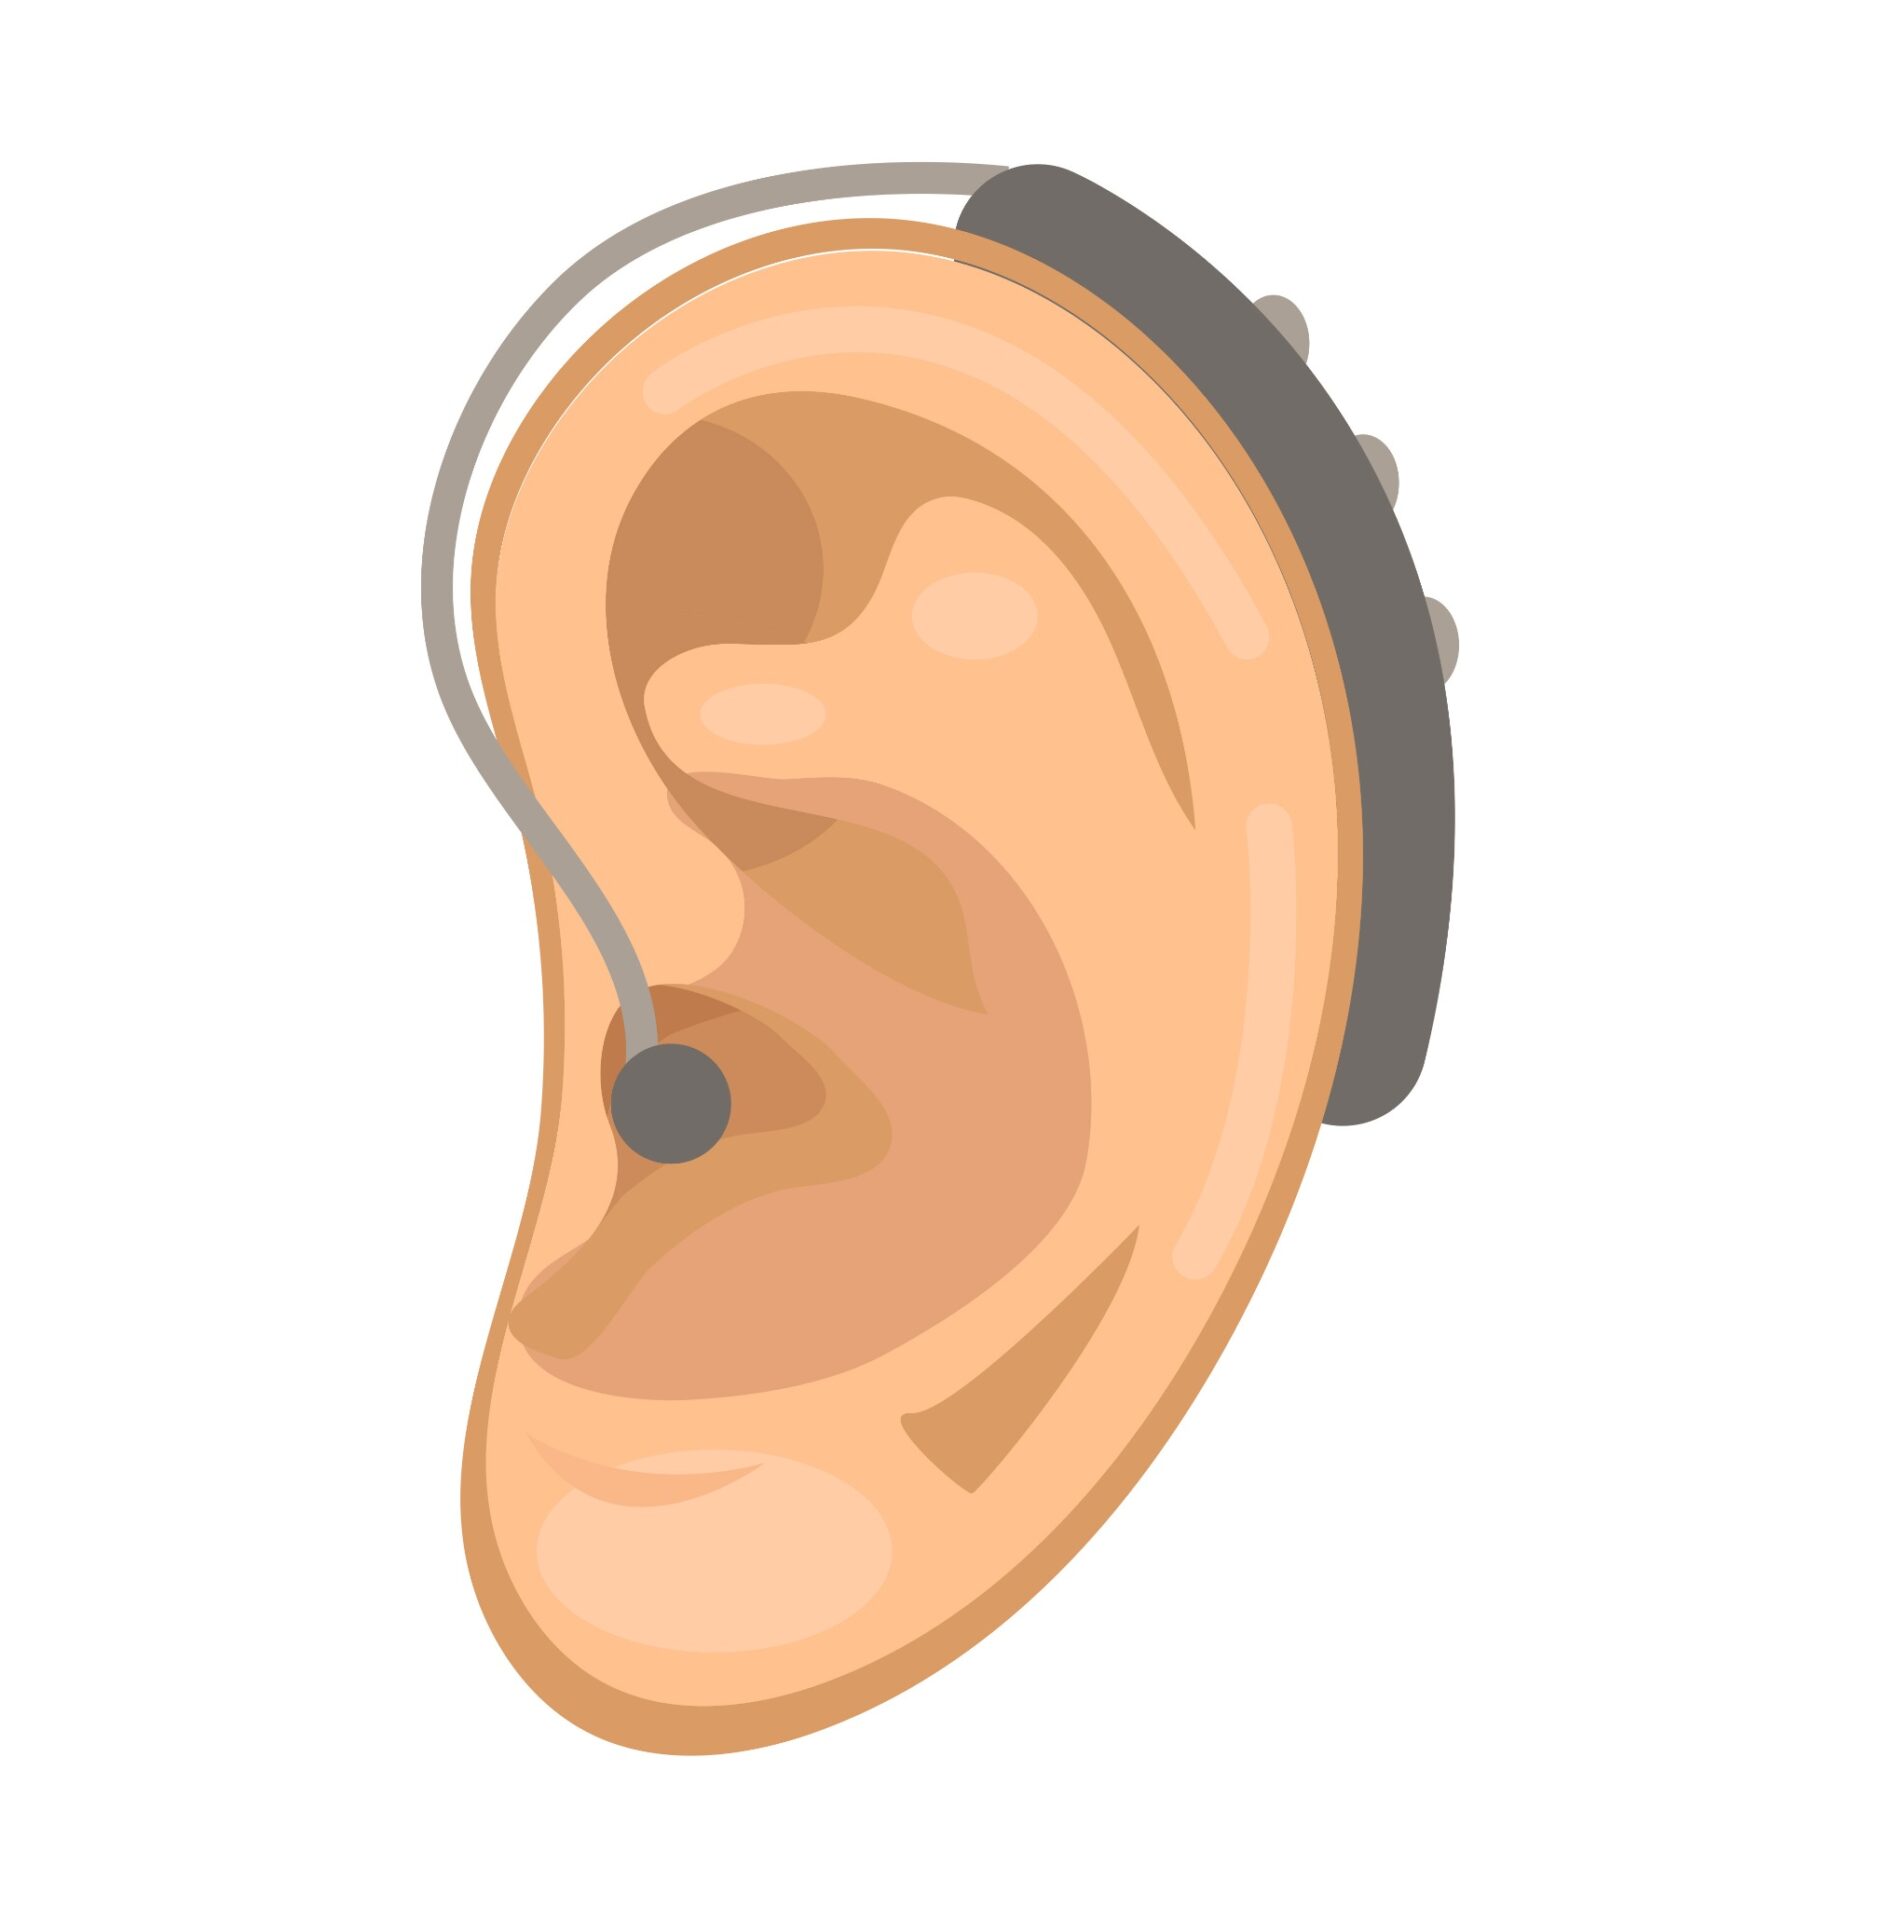 Ear icon in isometric 3d style isolated on white background